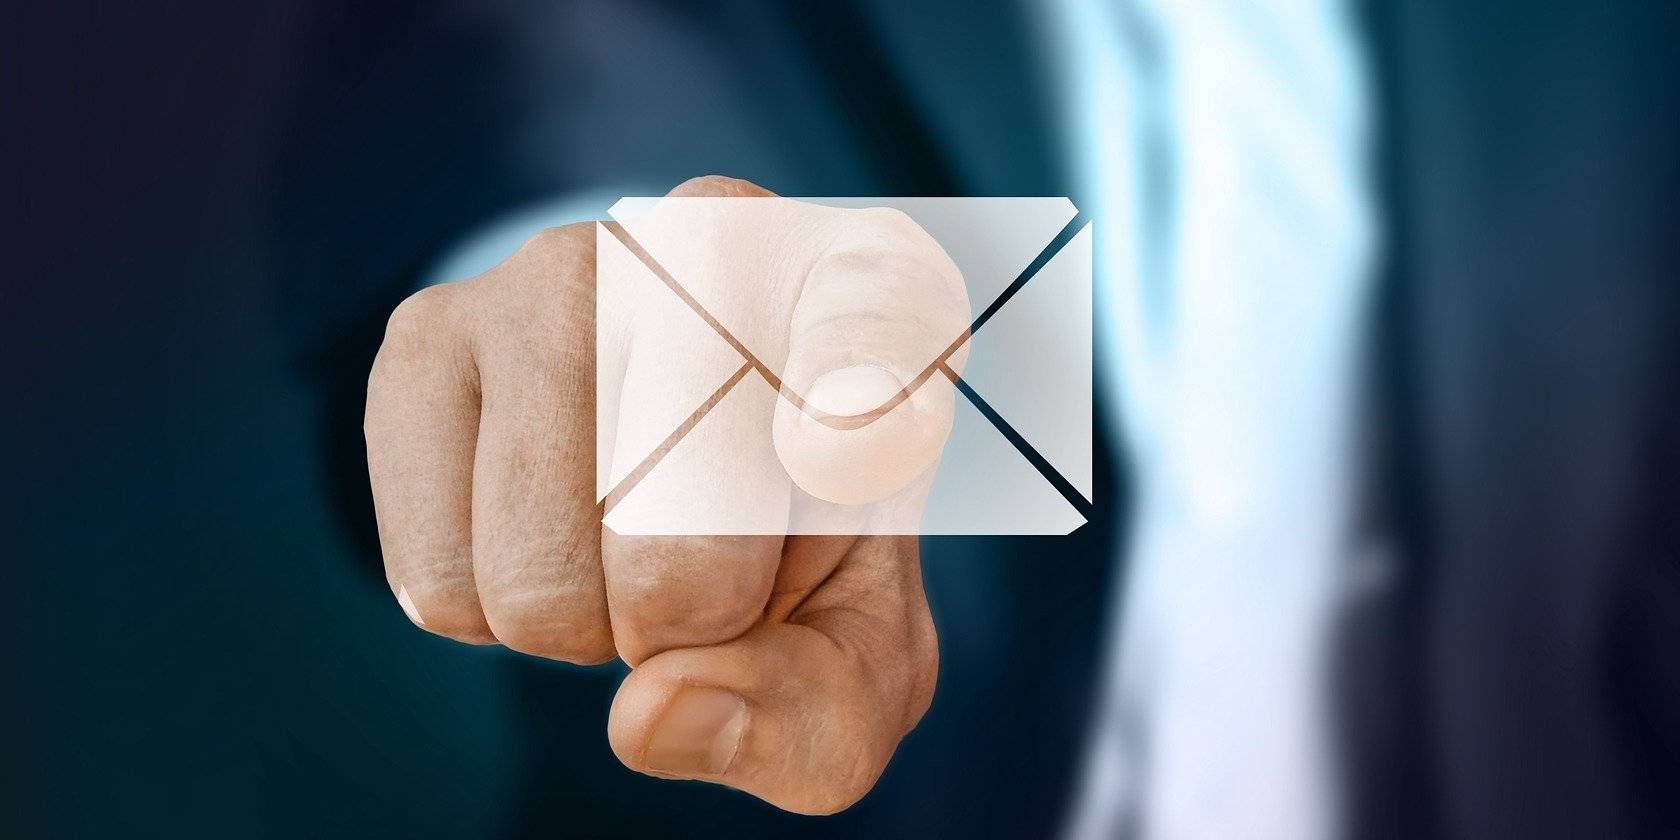 Free Email Tools to Clean Your Inbox and Make Gmail Better